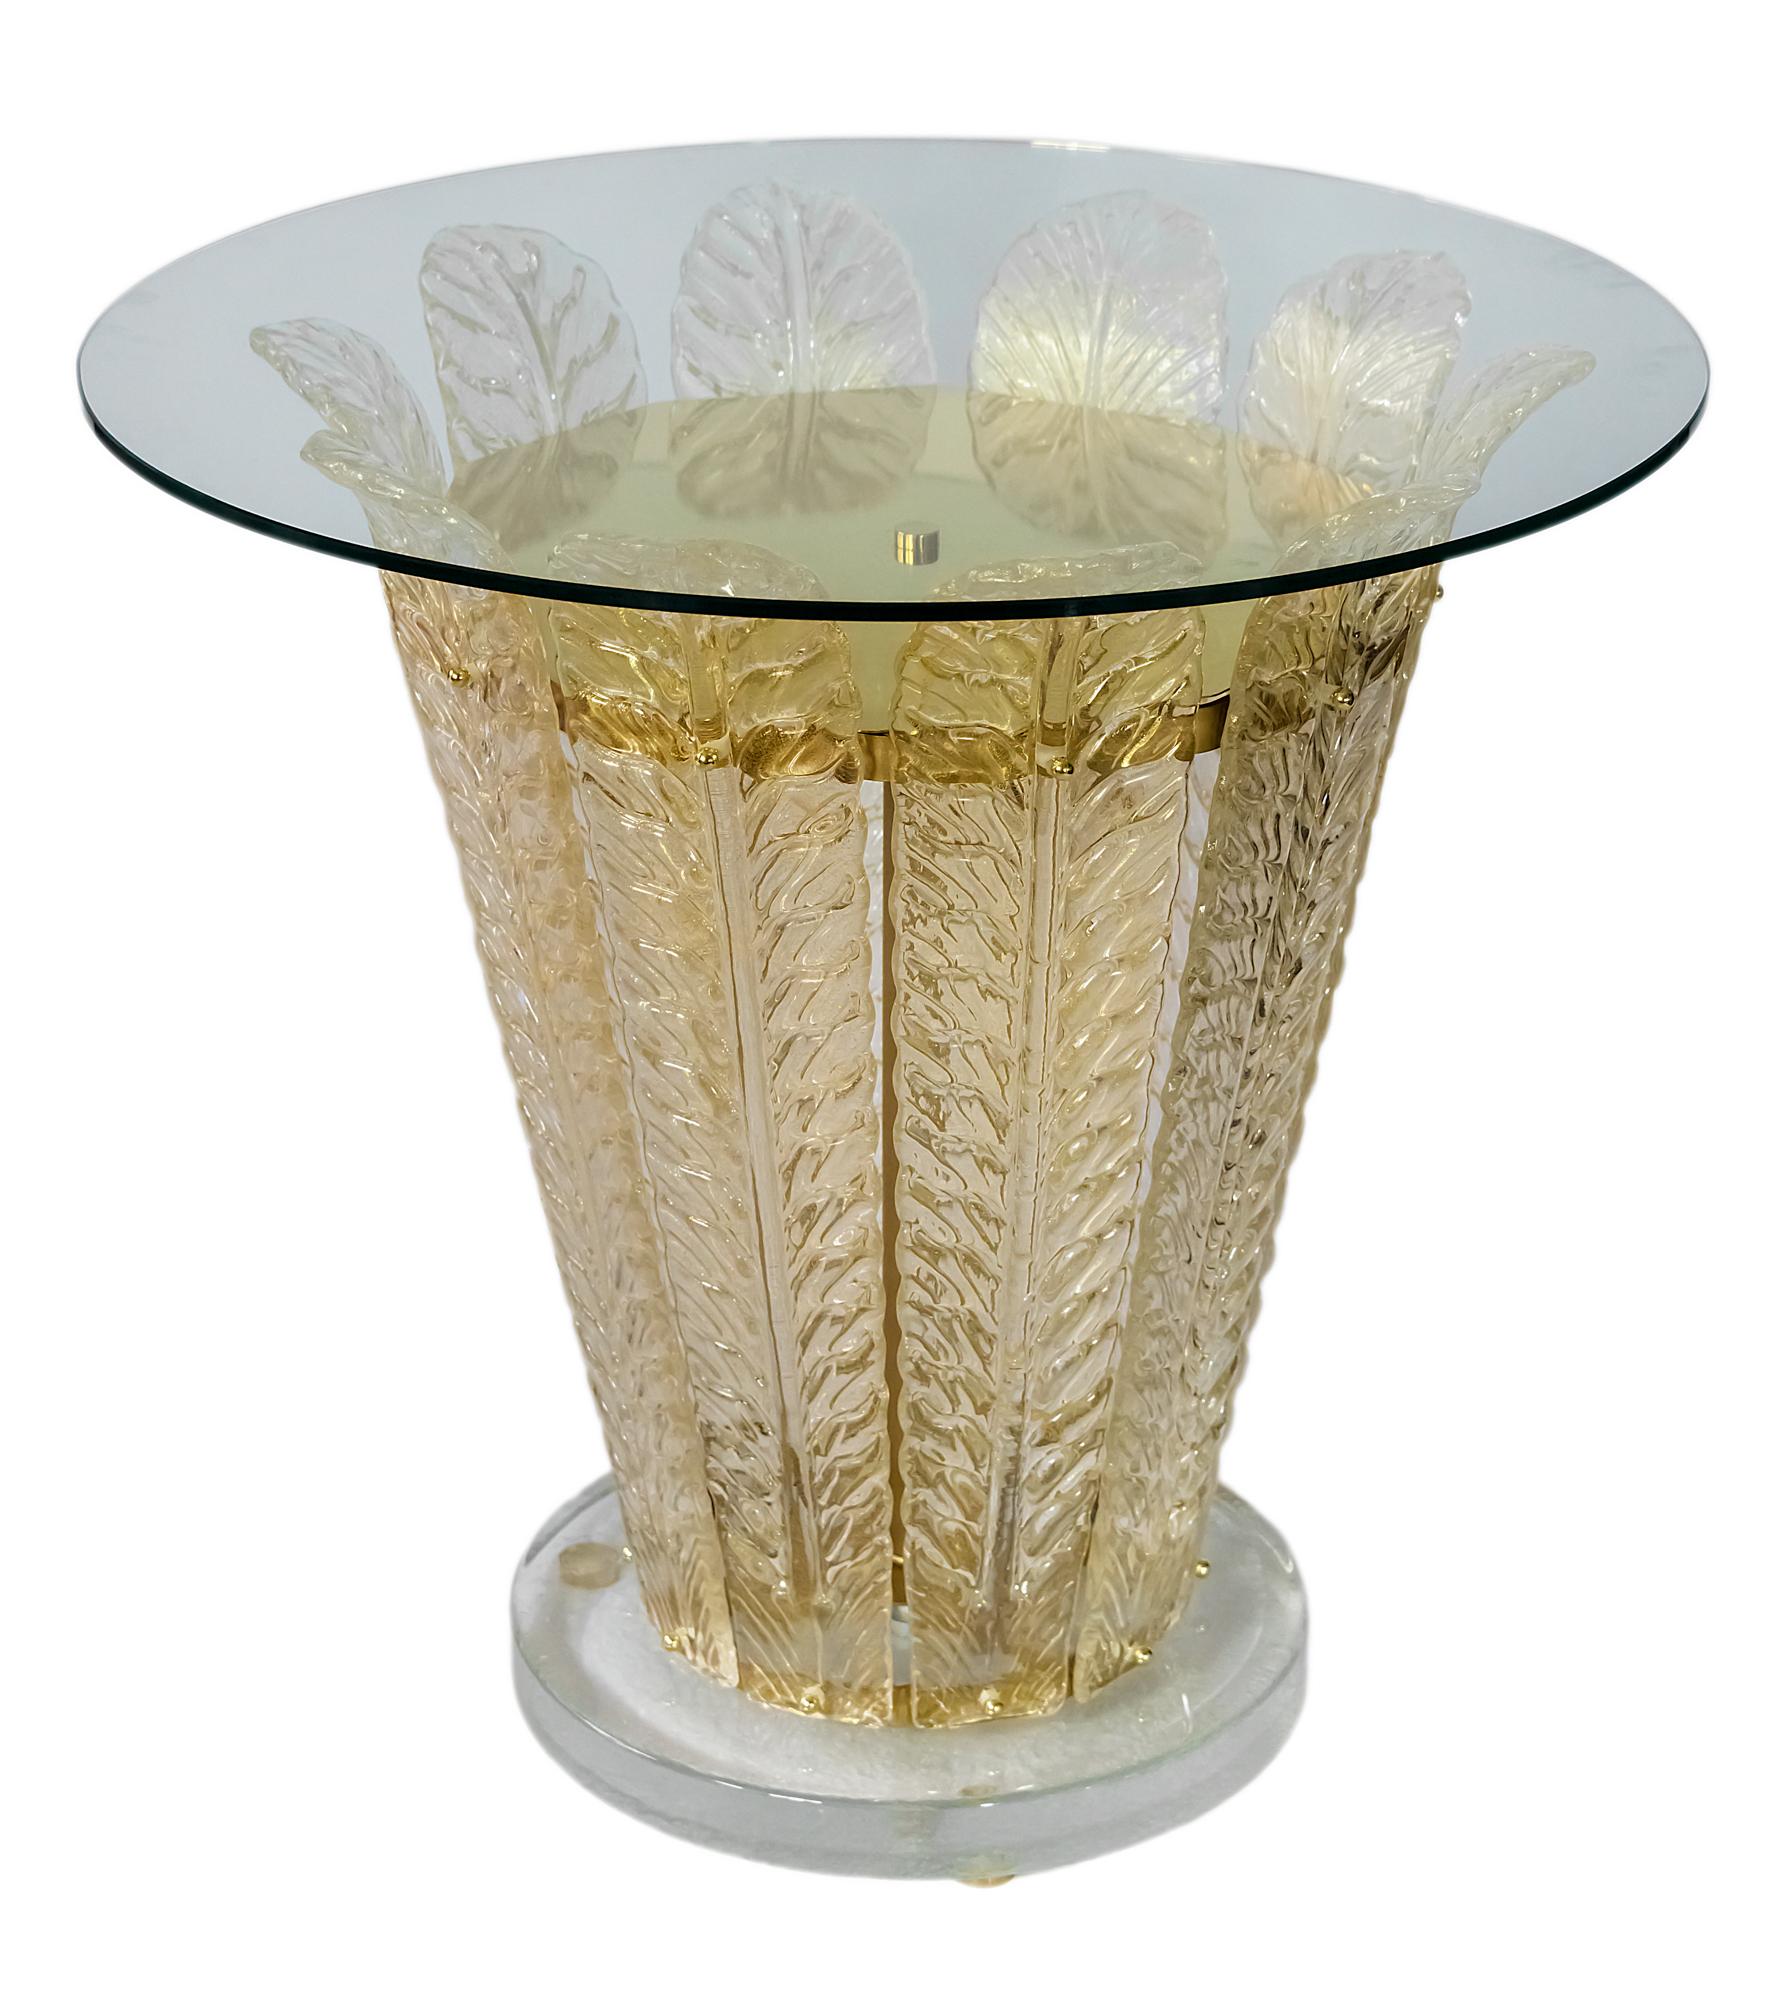 Illuminated Italian Side Table with Murano Glass Leaf Decor In Excellent Condition For Sale In Vilnius, LT